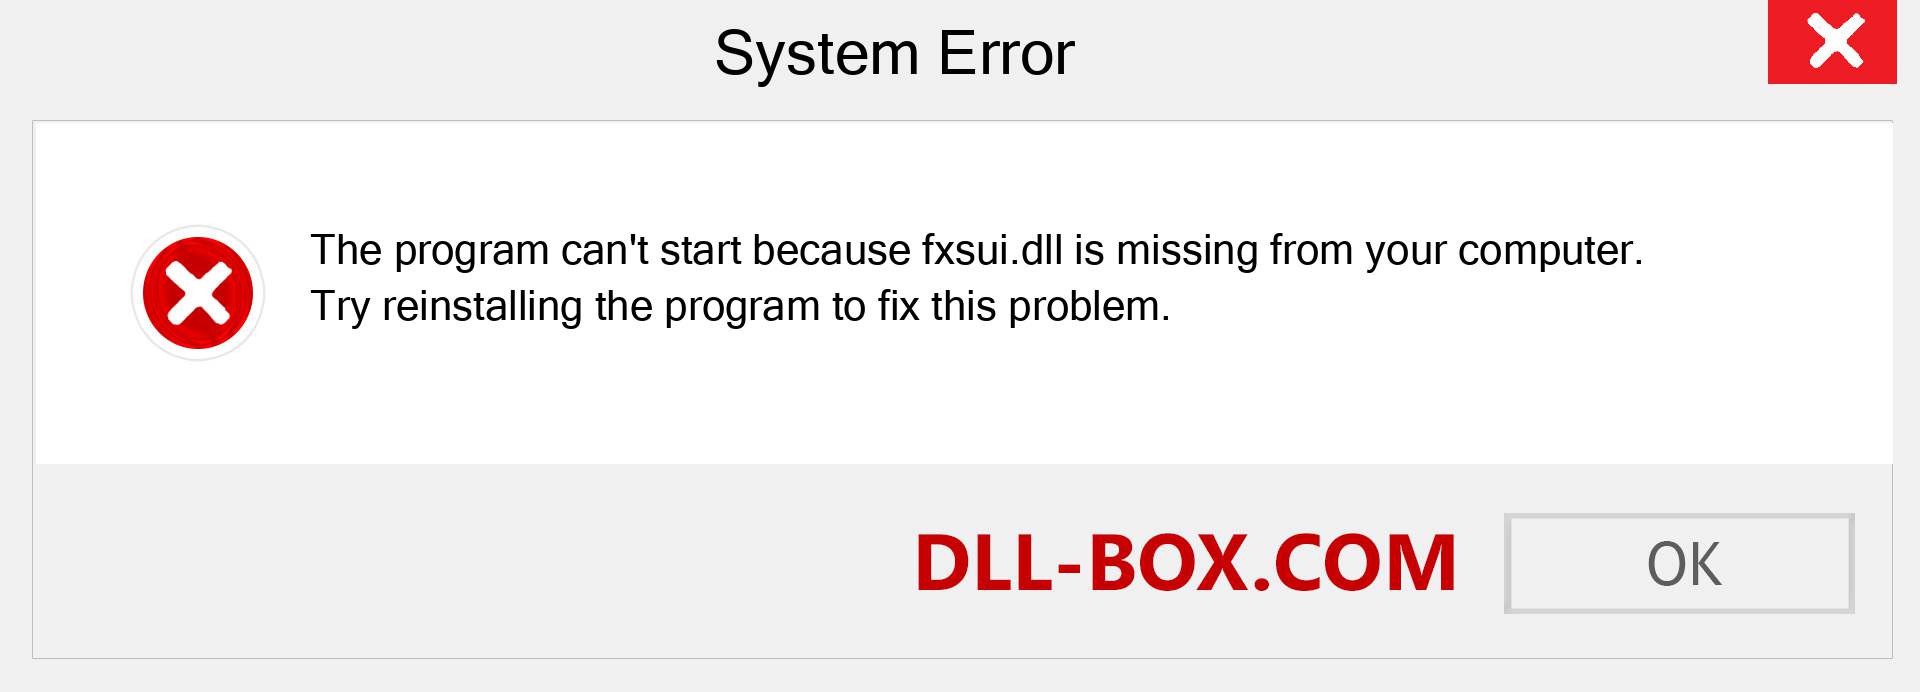  fxsui.dll file is missing?. Download for Windows 7, 8, 10 - Fix  fxsui dll Missing Error on Windows, photos, images